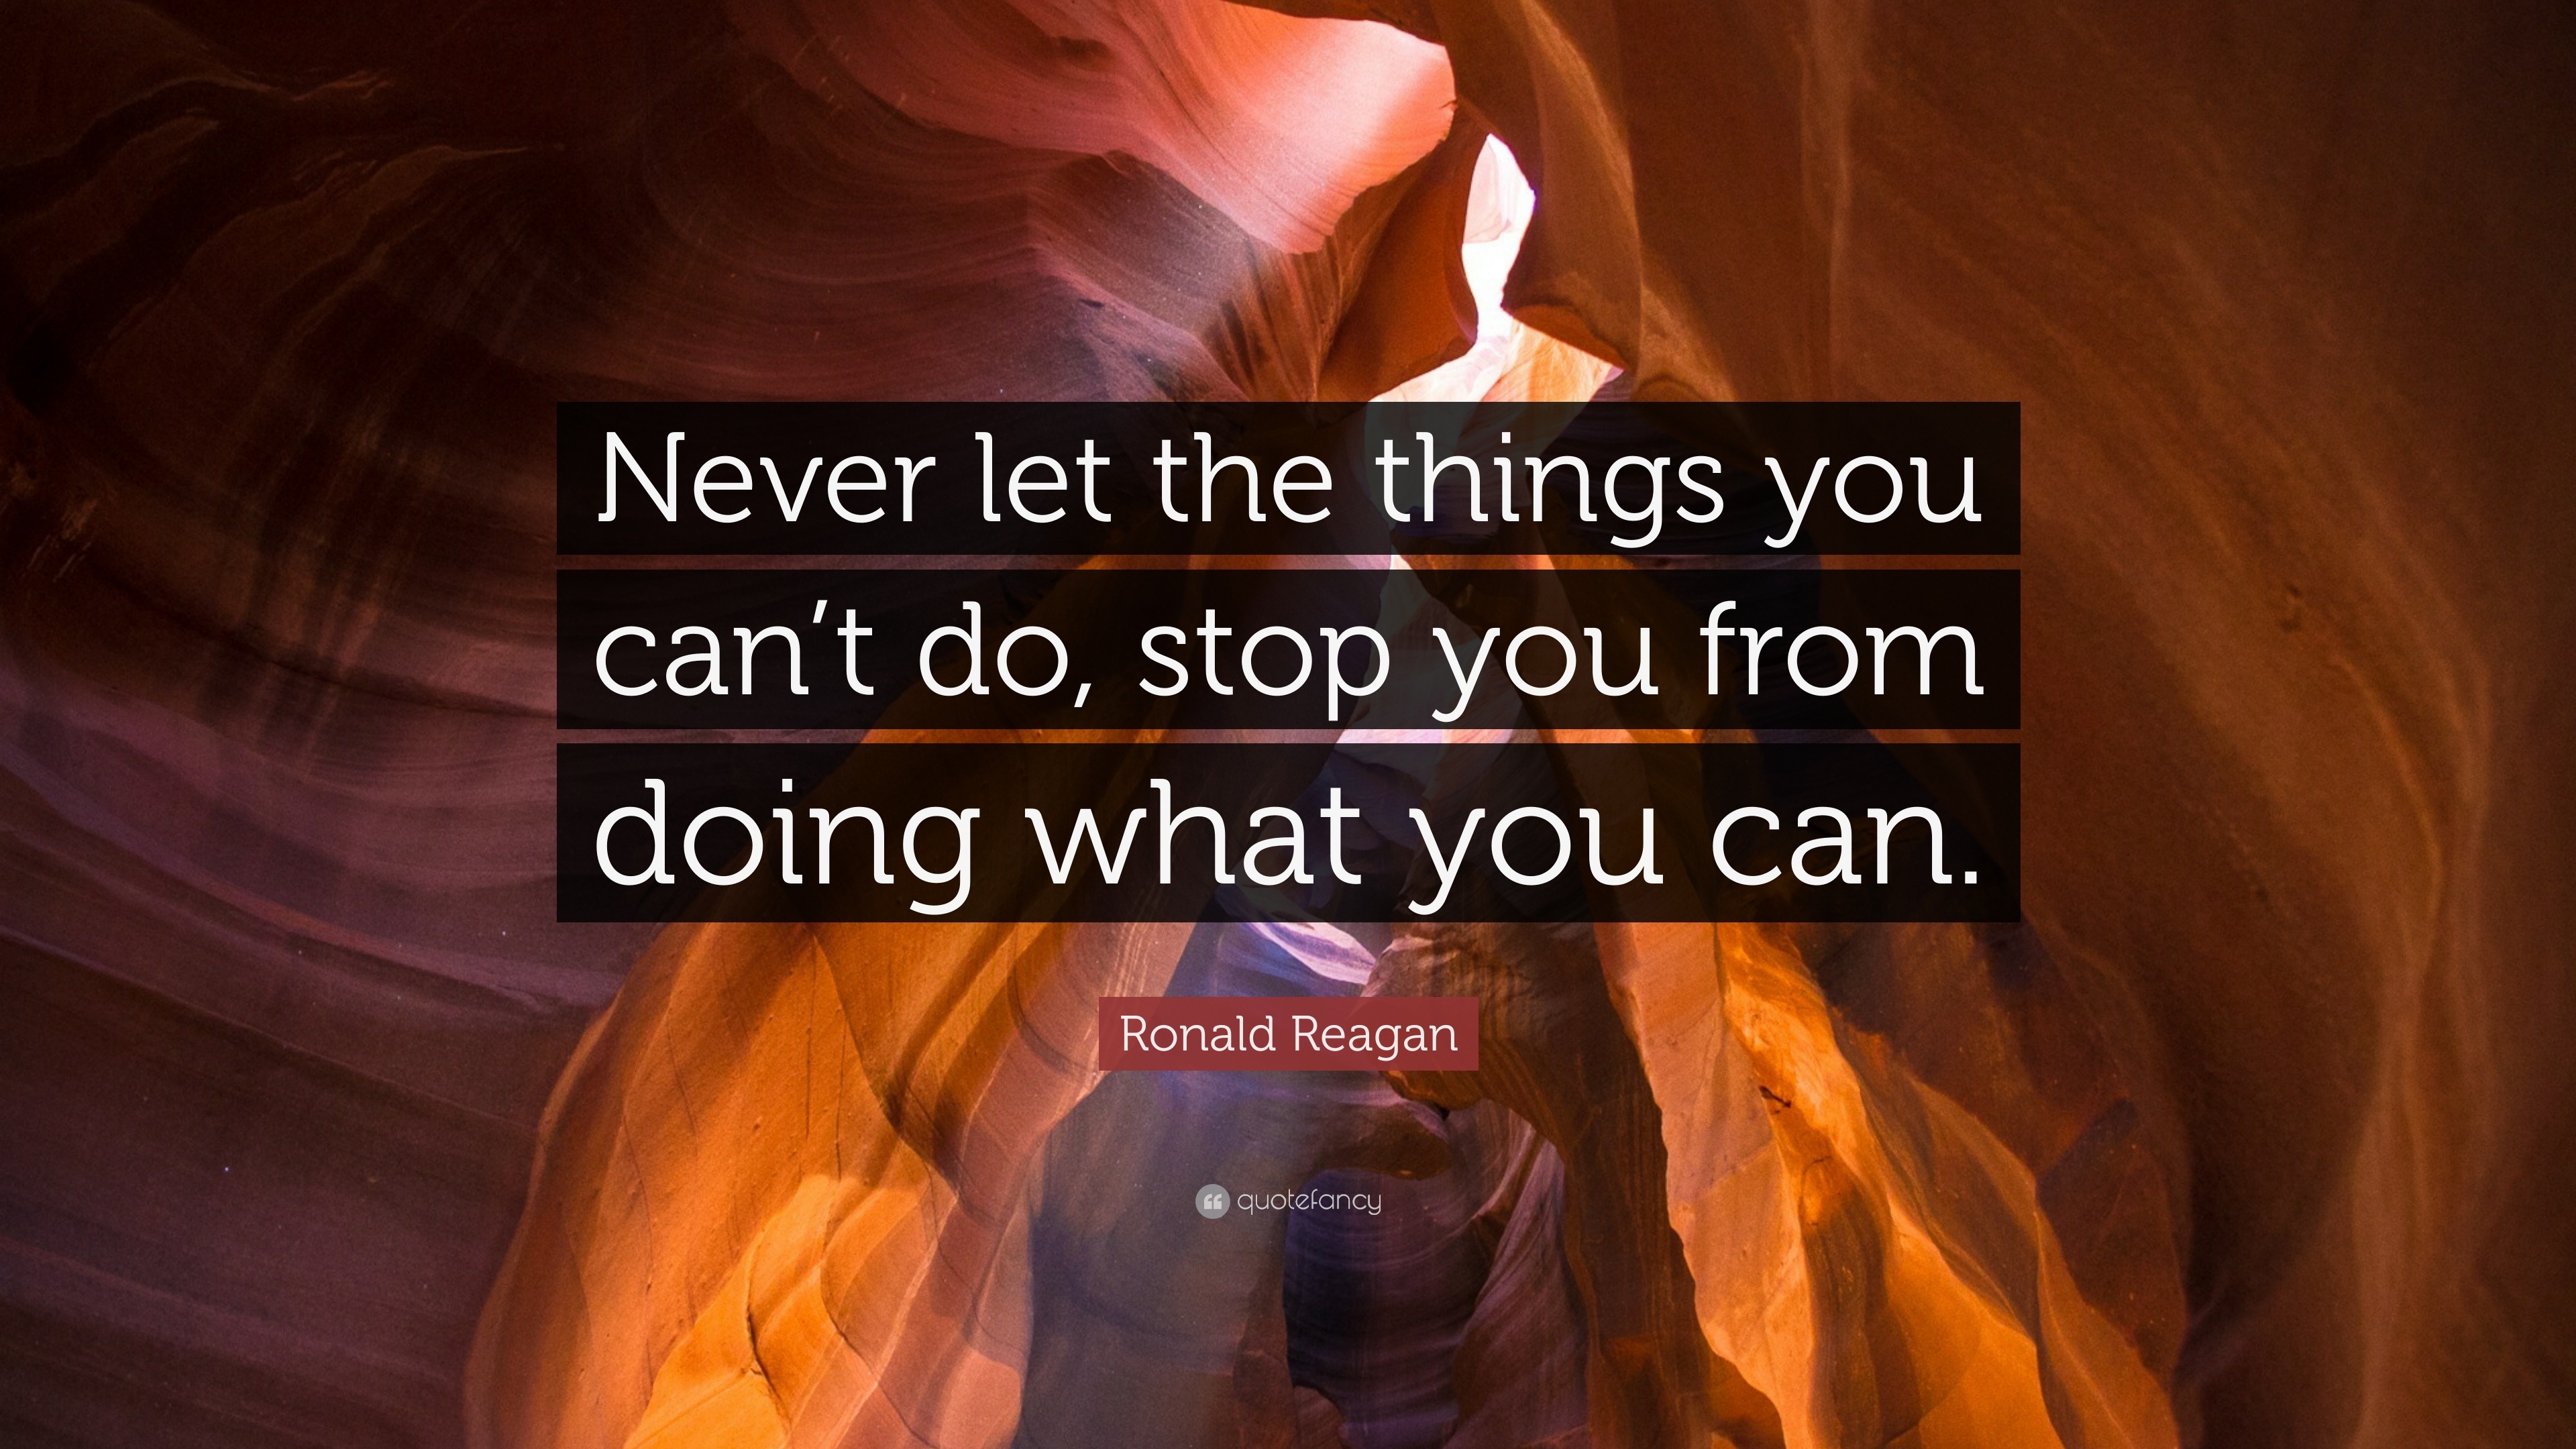 Ronald Reagan Quote “Never let the things you can t do stop